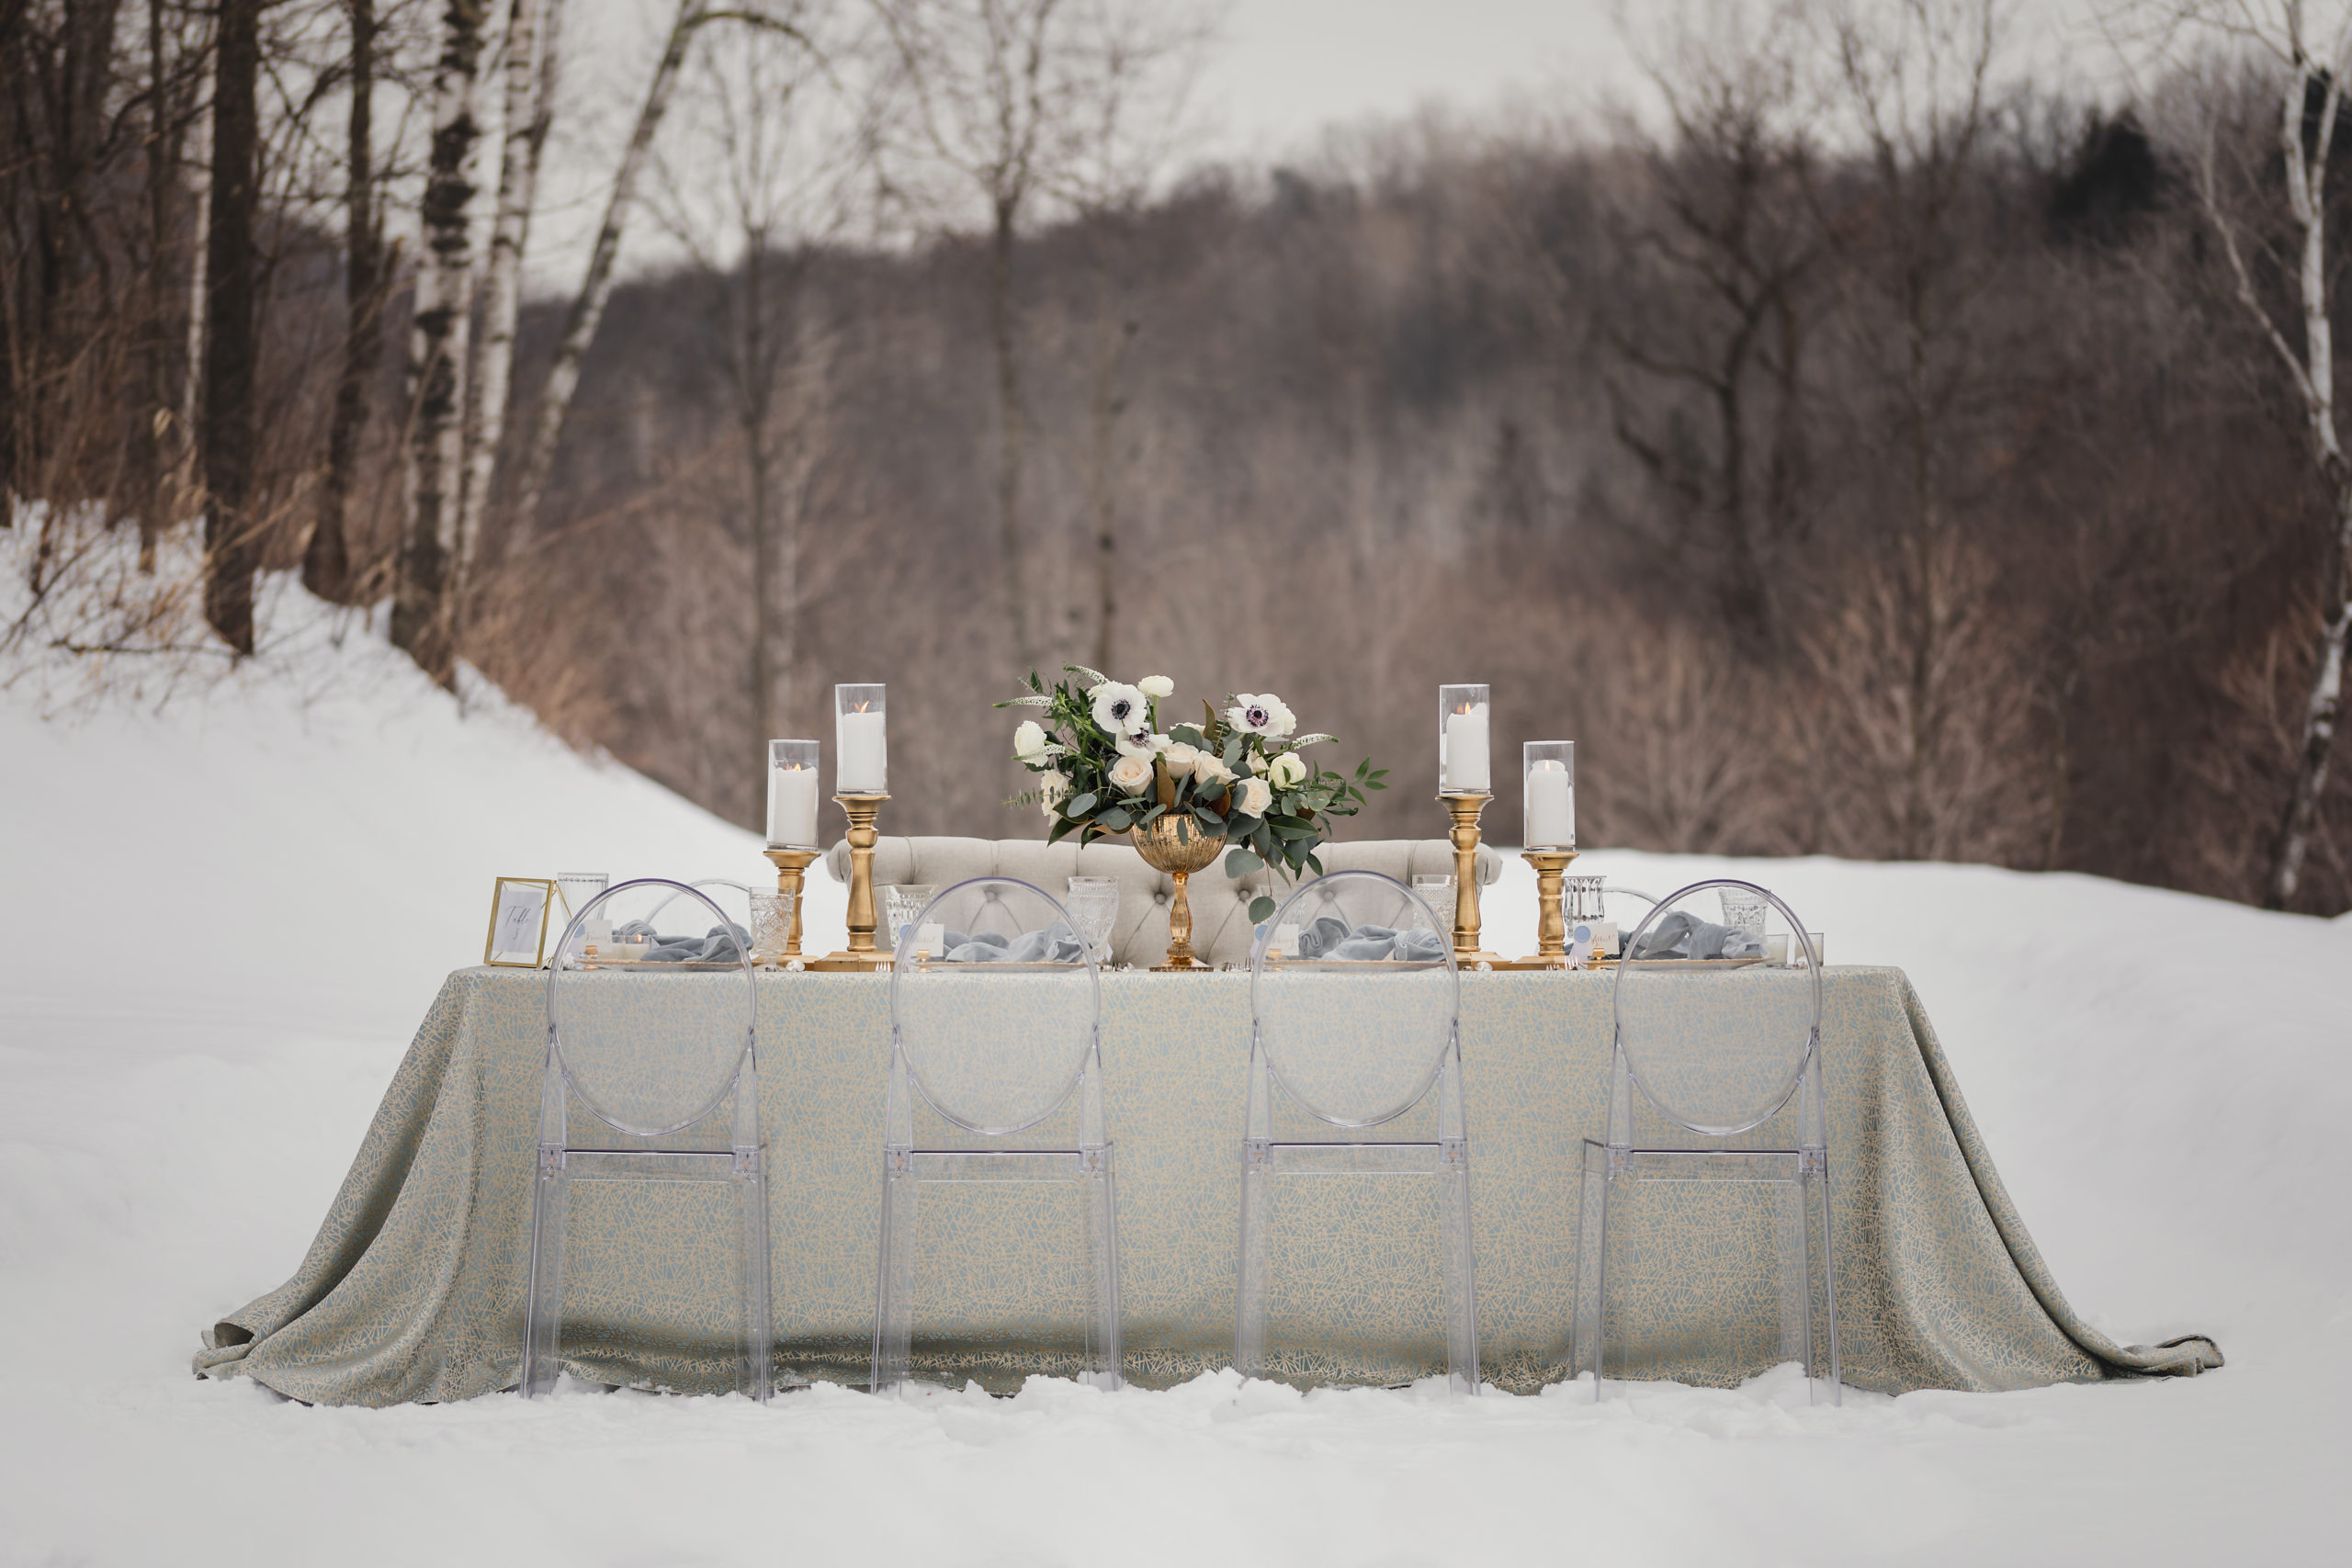 The Wedding Magazine Winter Wedding Inspiration - Styled Shoot | A Winter's Tale - Copyright Pink Spruce Photography 2019